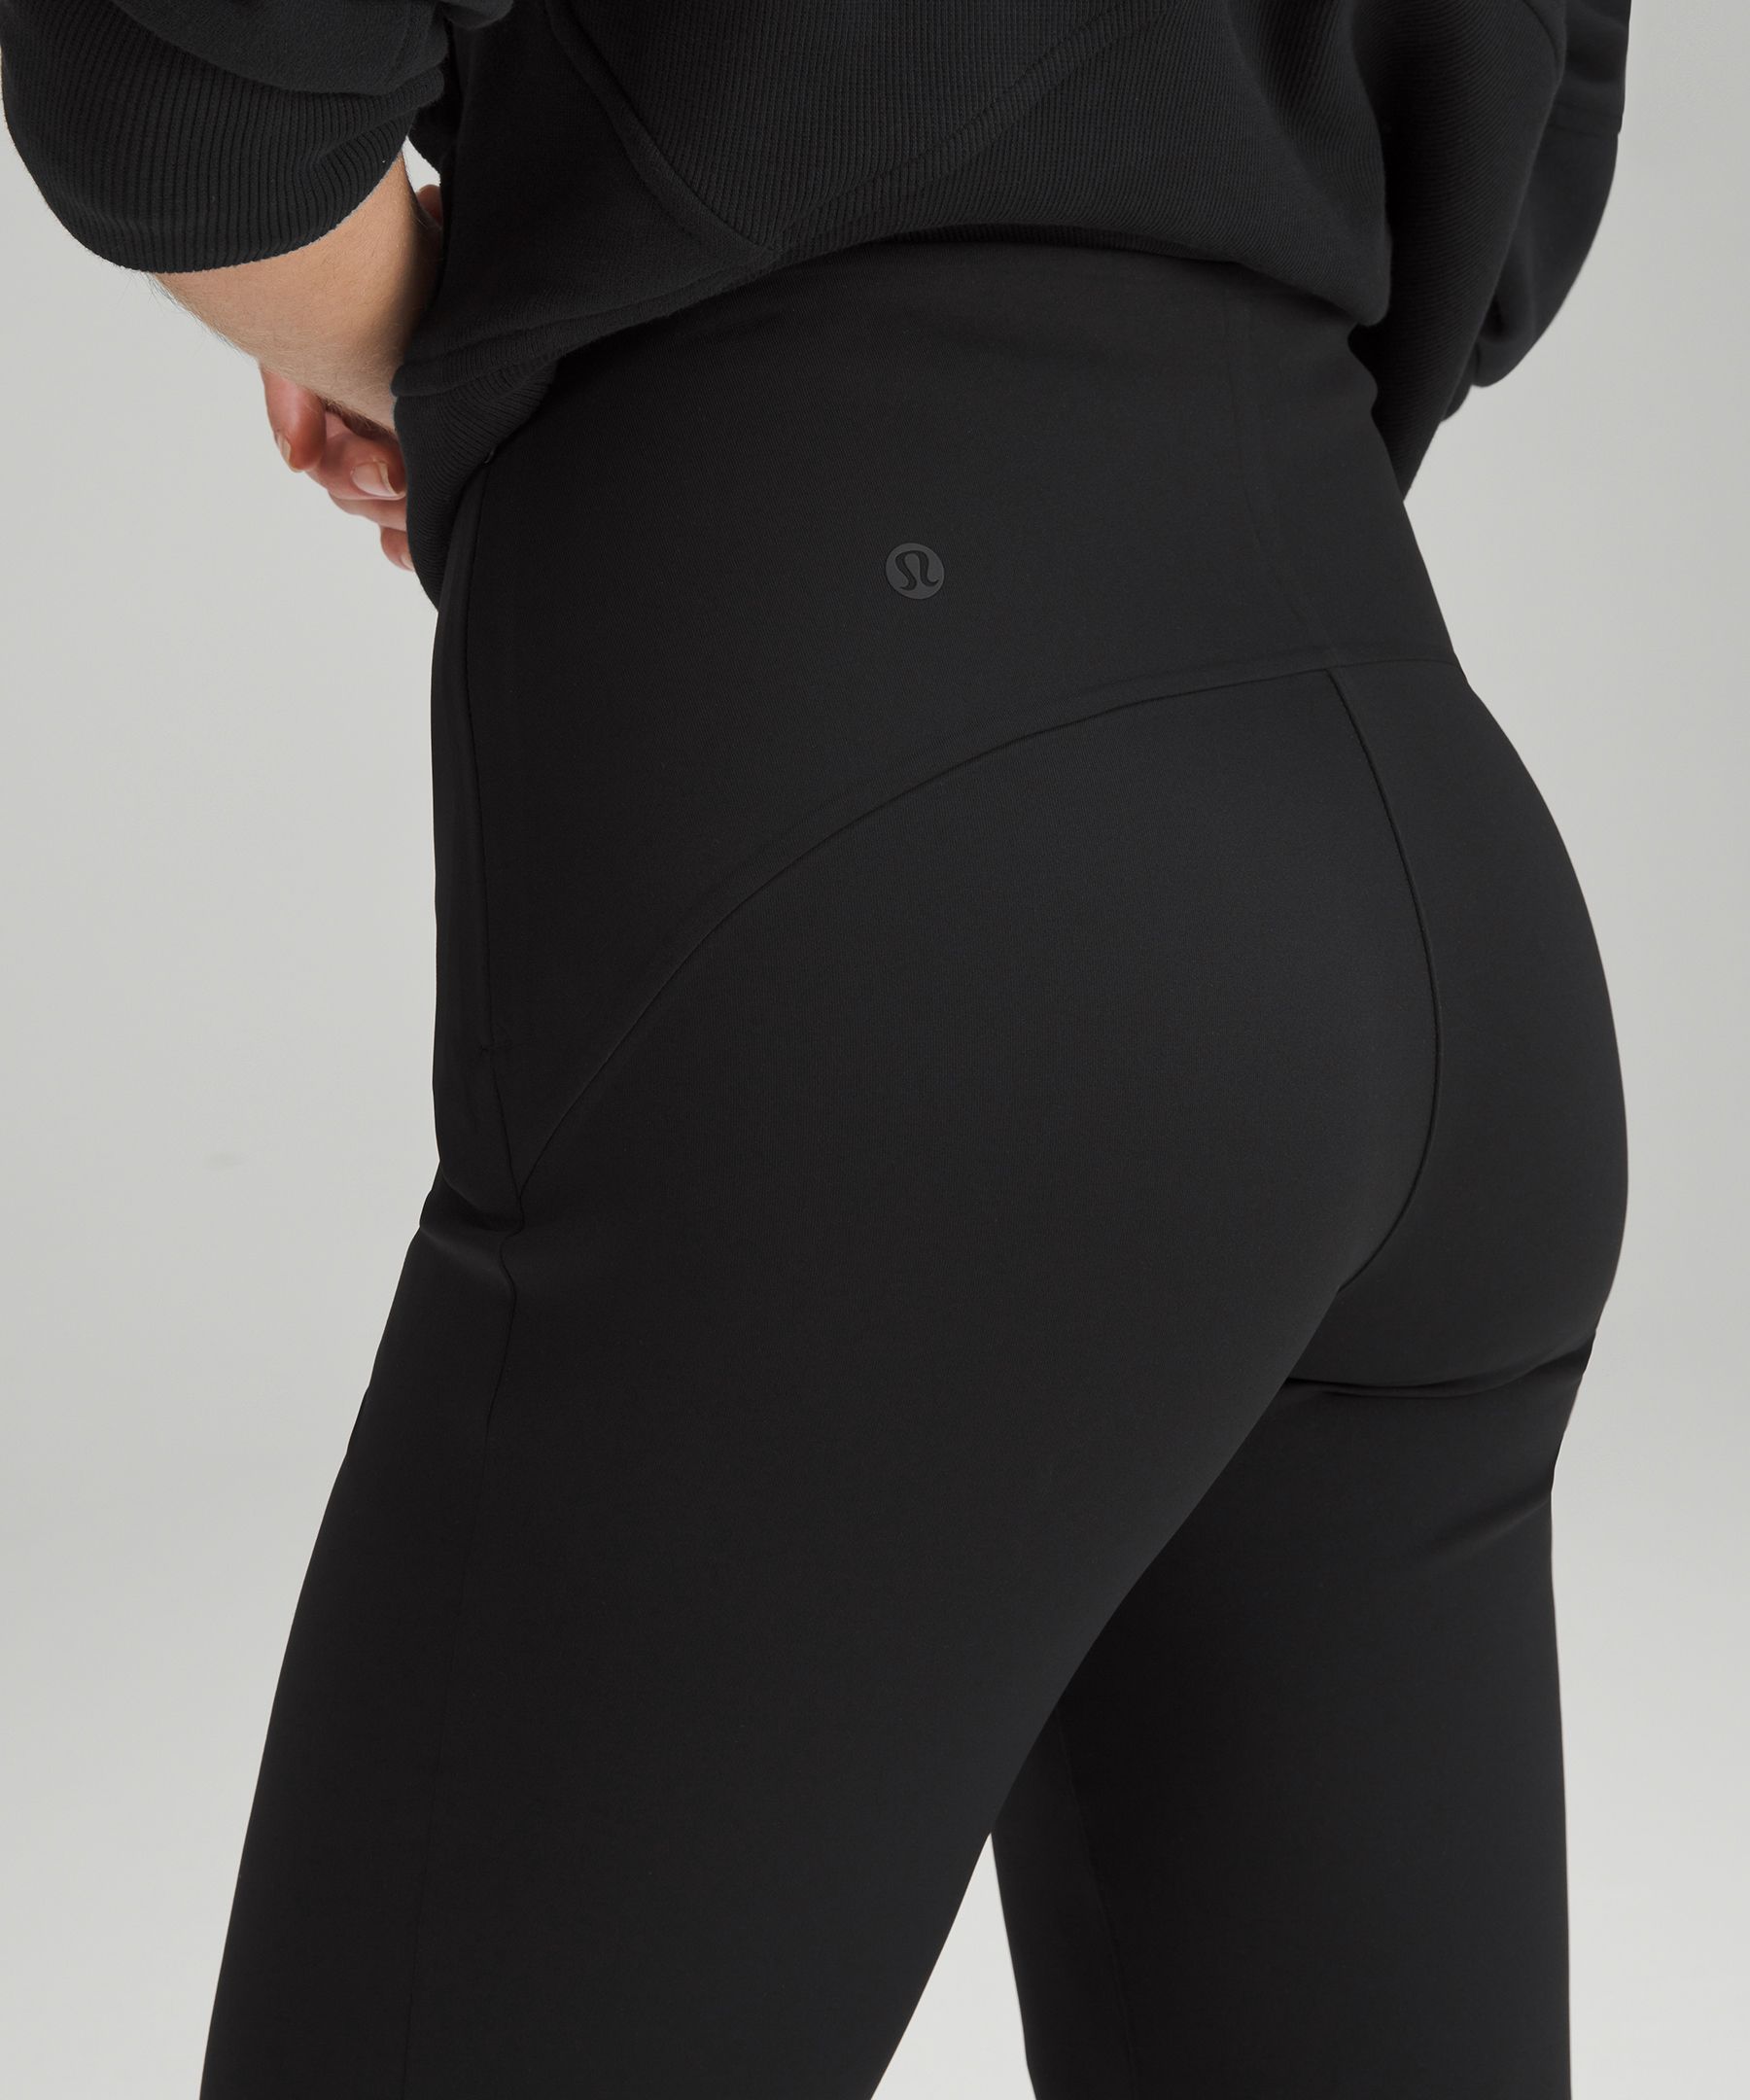 The @lululemon smooth fit pull on high rise pants are high on my